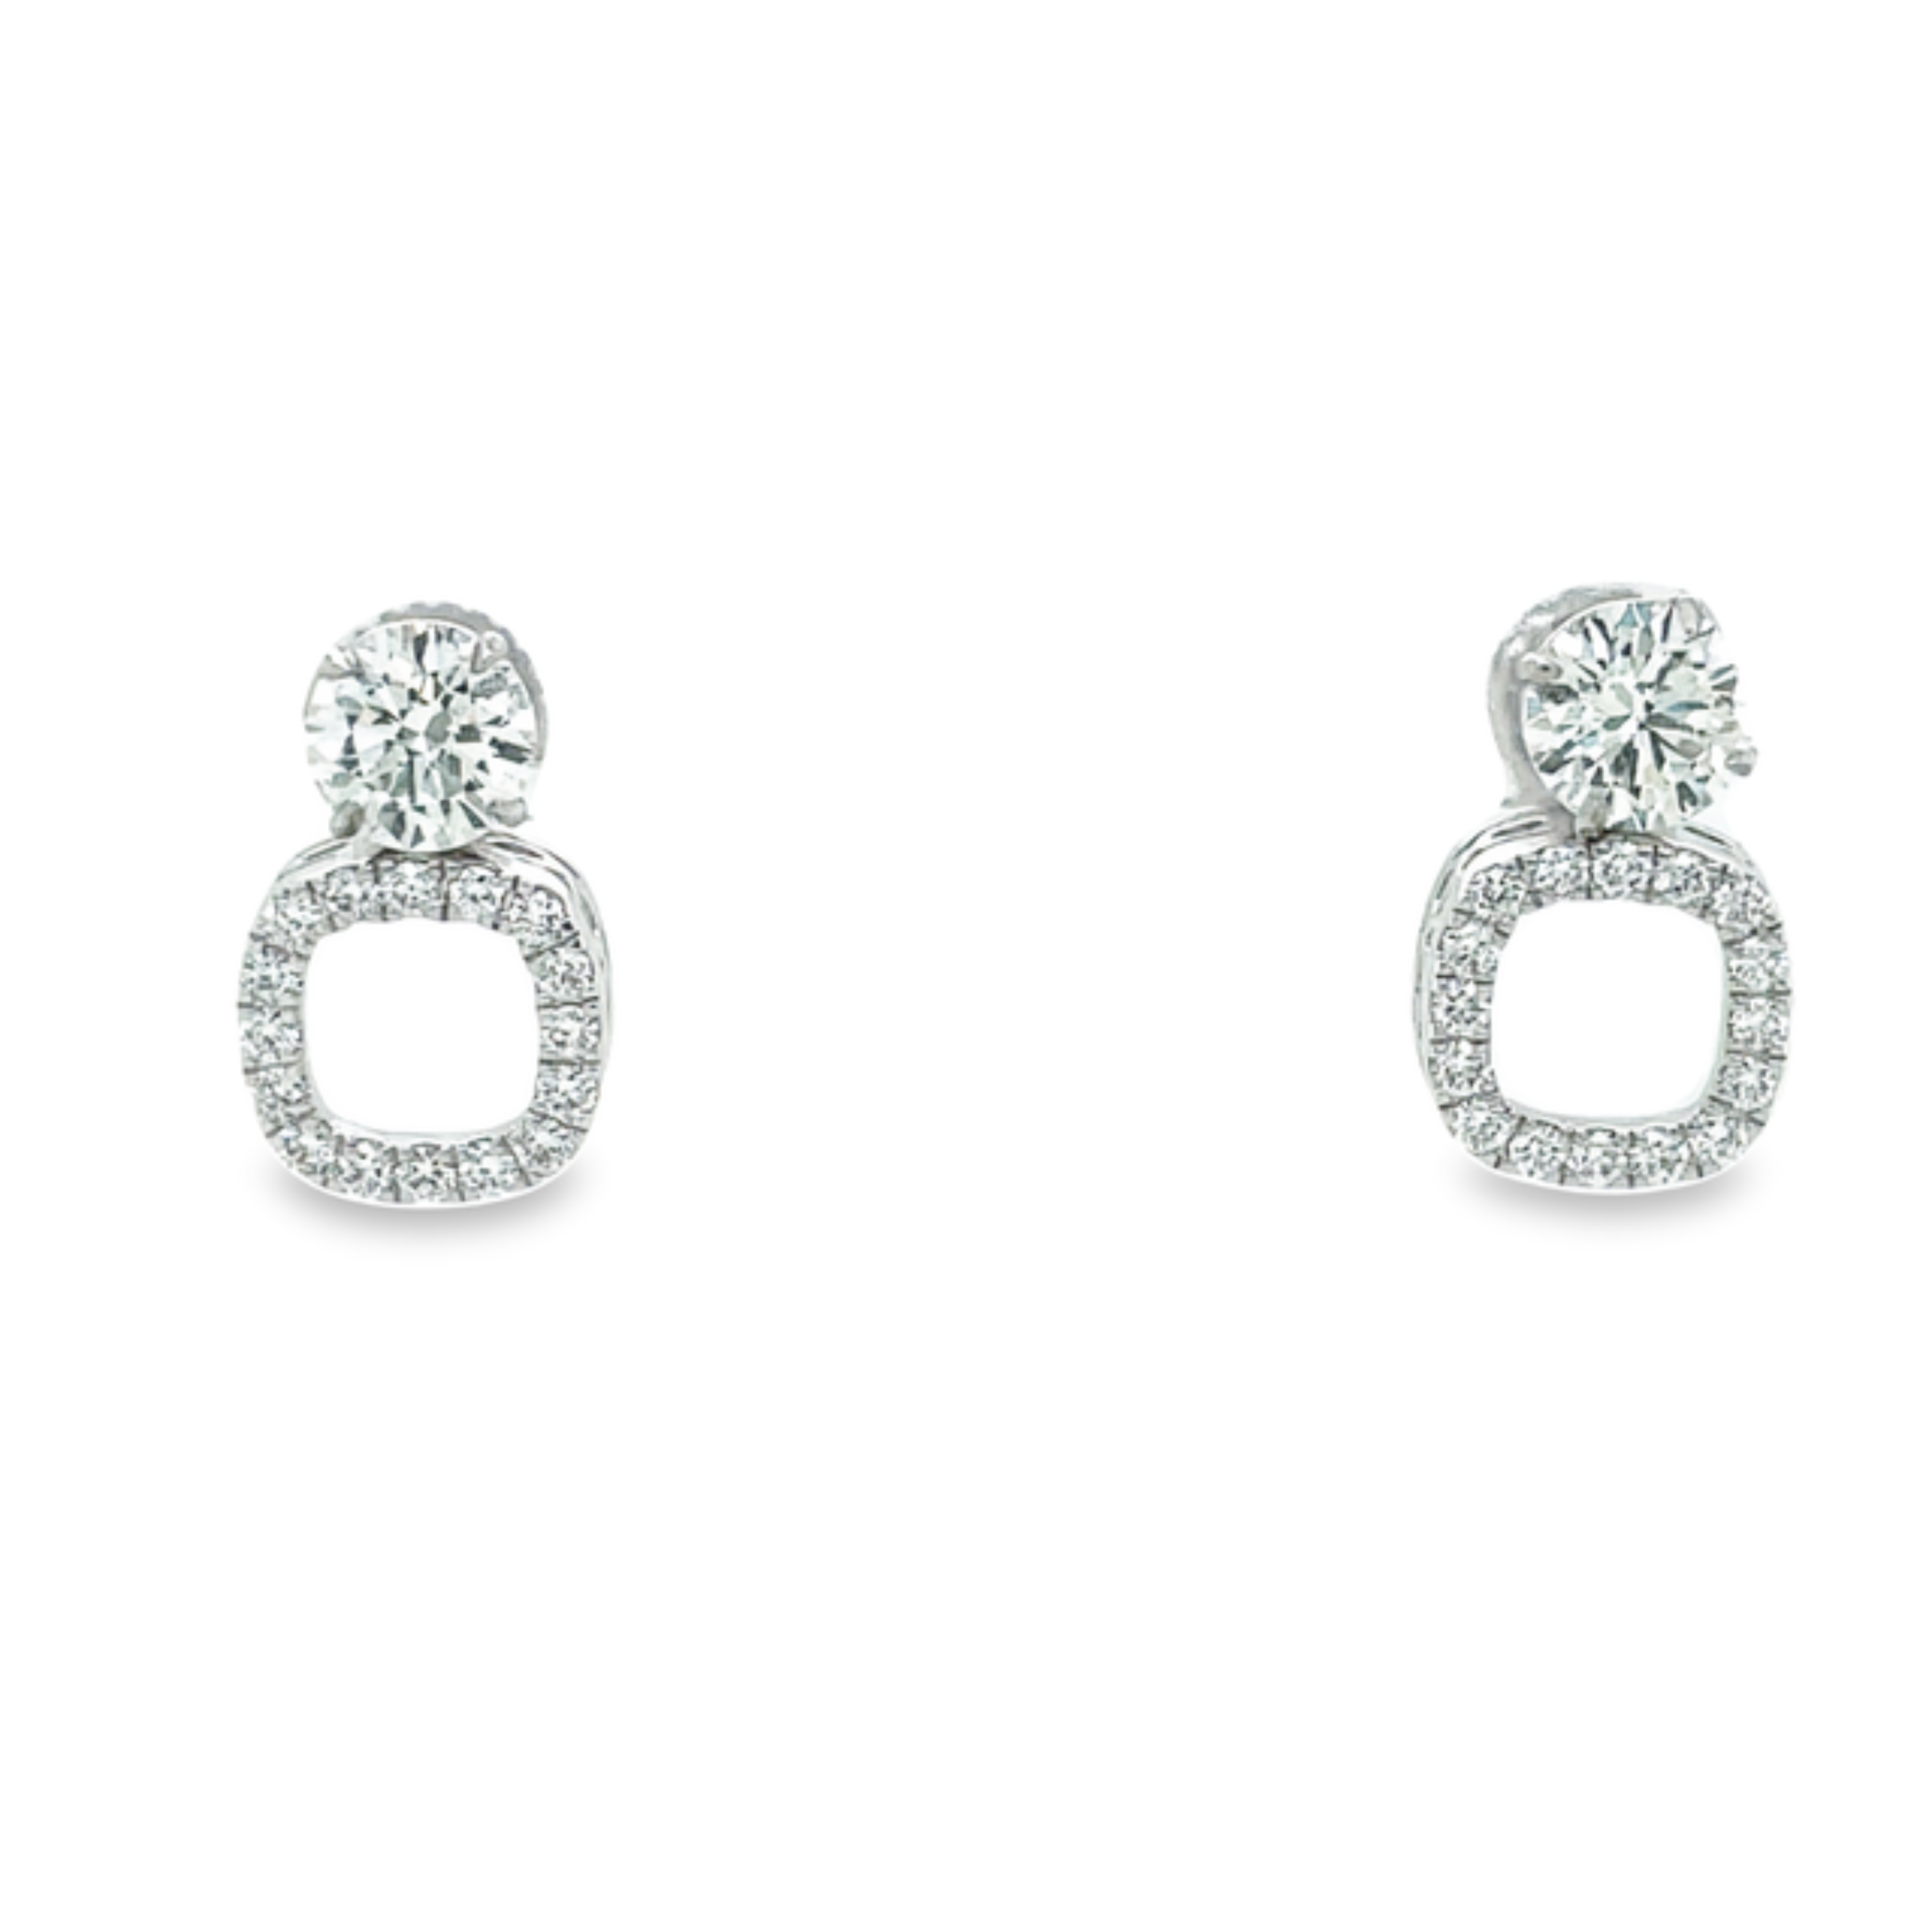 Marvel in the majestic beauty of these 14k white gold earring jackets. Their bold 12.00 x 12.00 mm square shape is accentuated with F/G grade round diamonds that twinkle with 0.75 cts. The diamond square removable jackets are a must-have addition to your jewelry collection! (Diamond studs not included.)